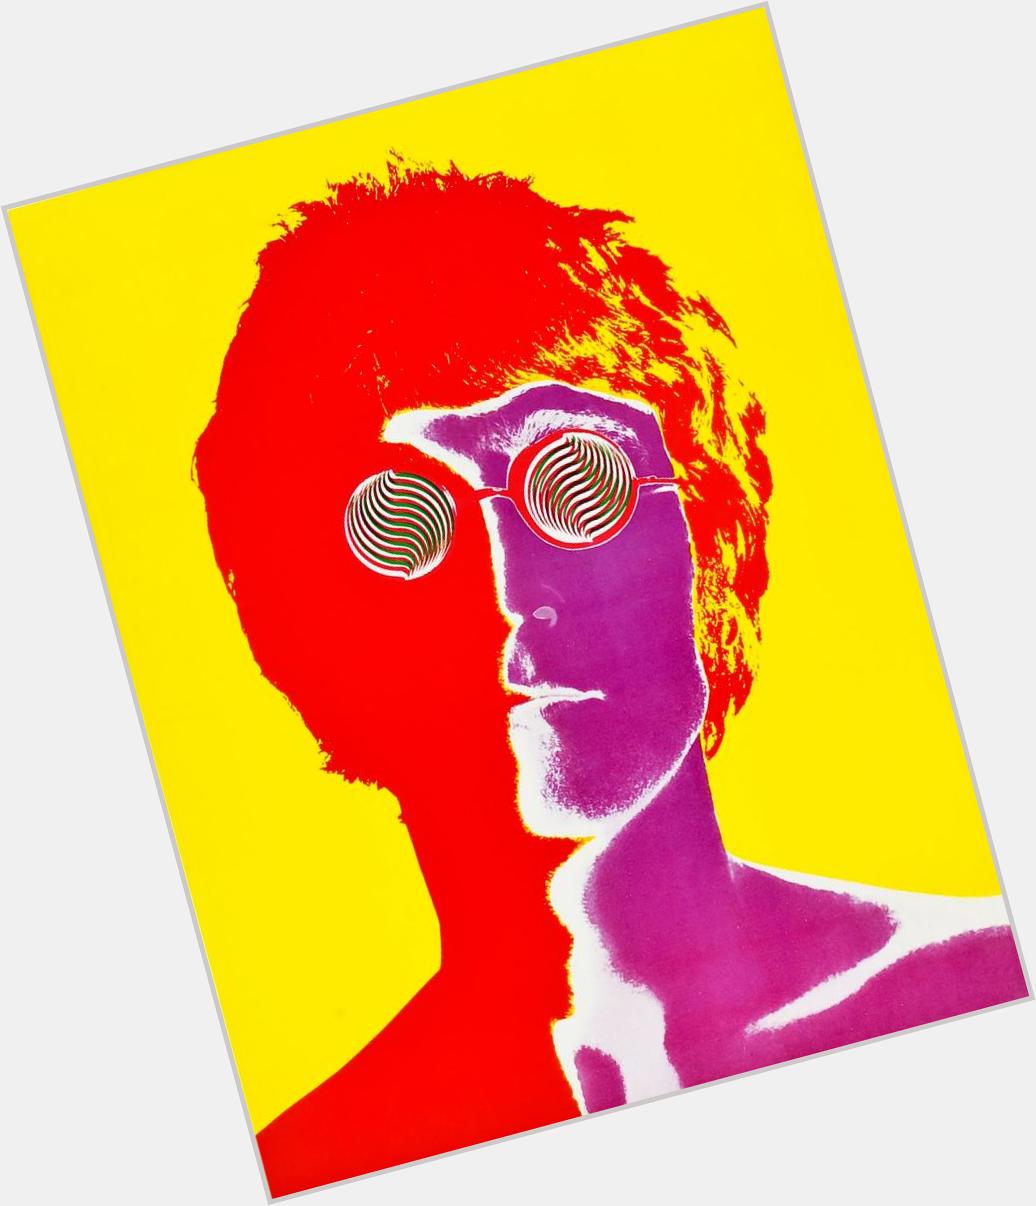 Happy 75th birthday to the father of psychedelia, John Lennon. 